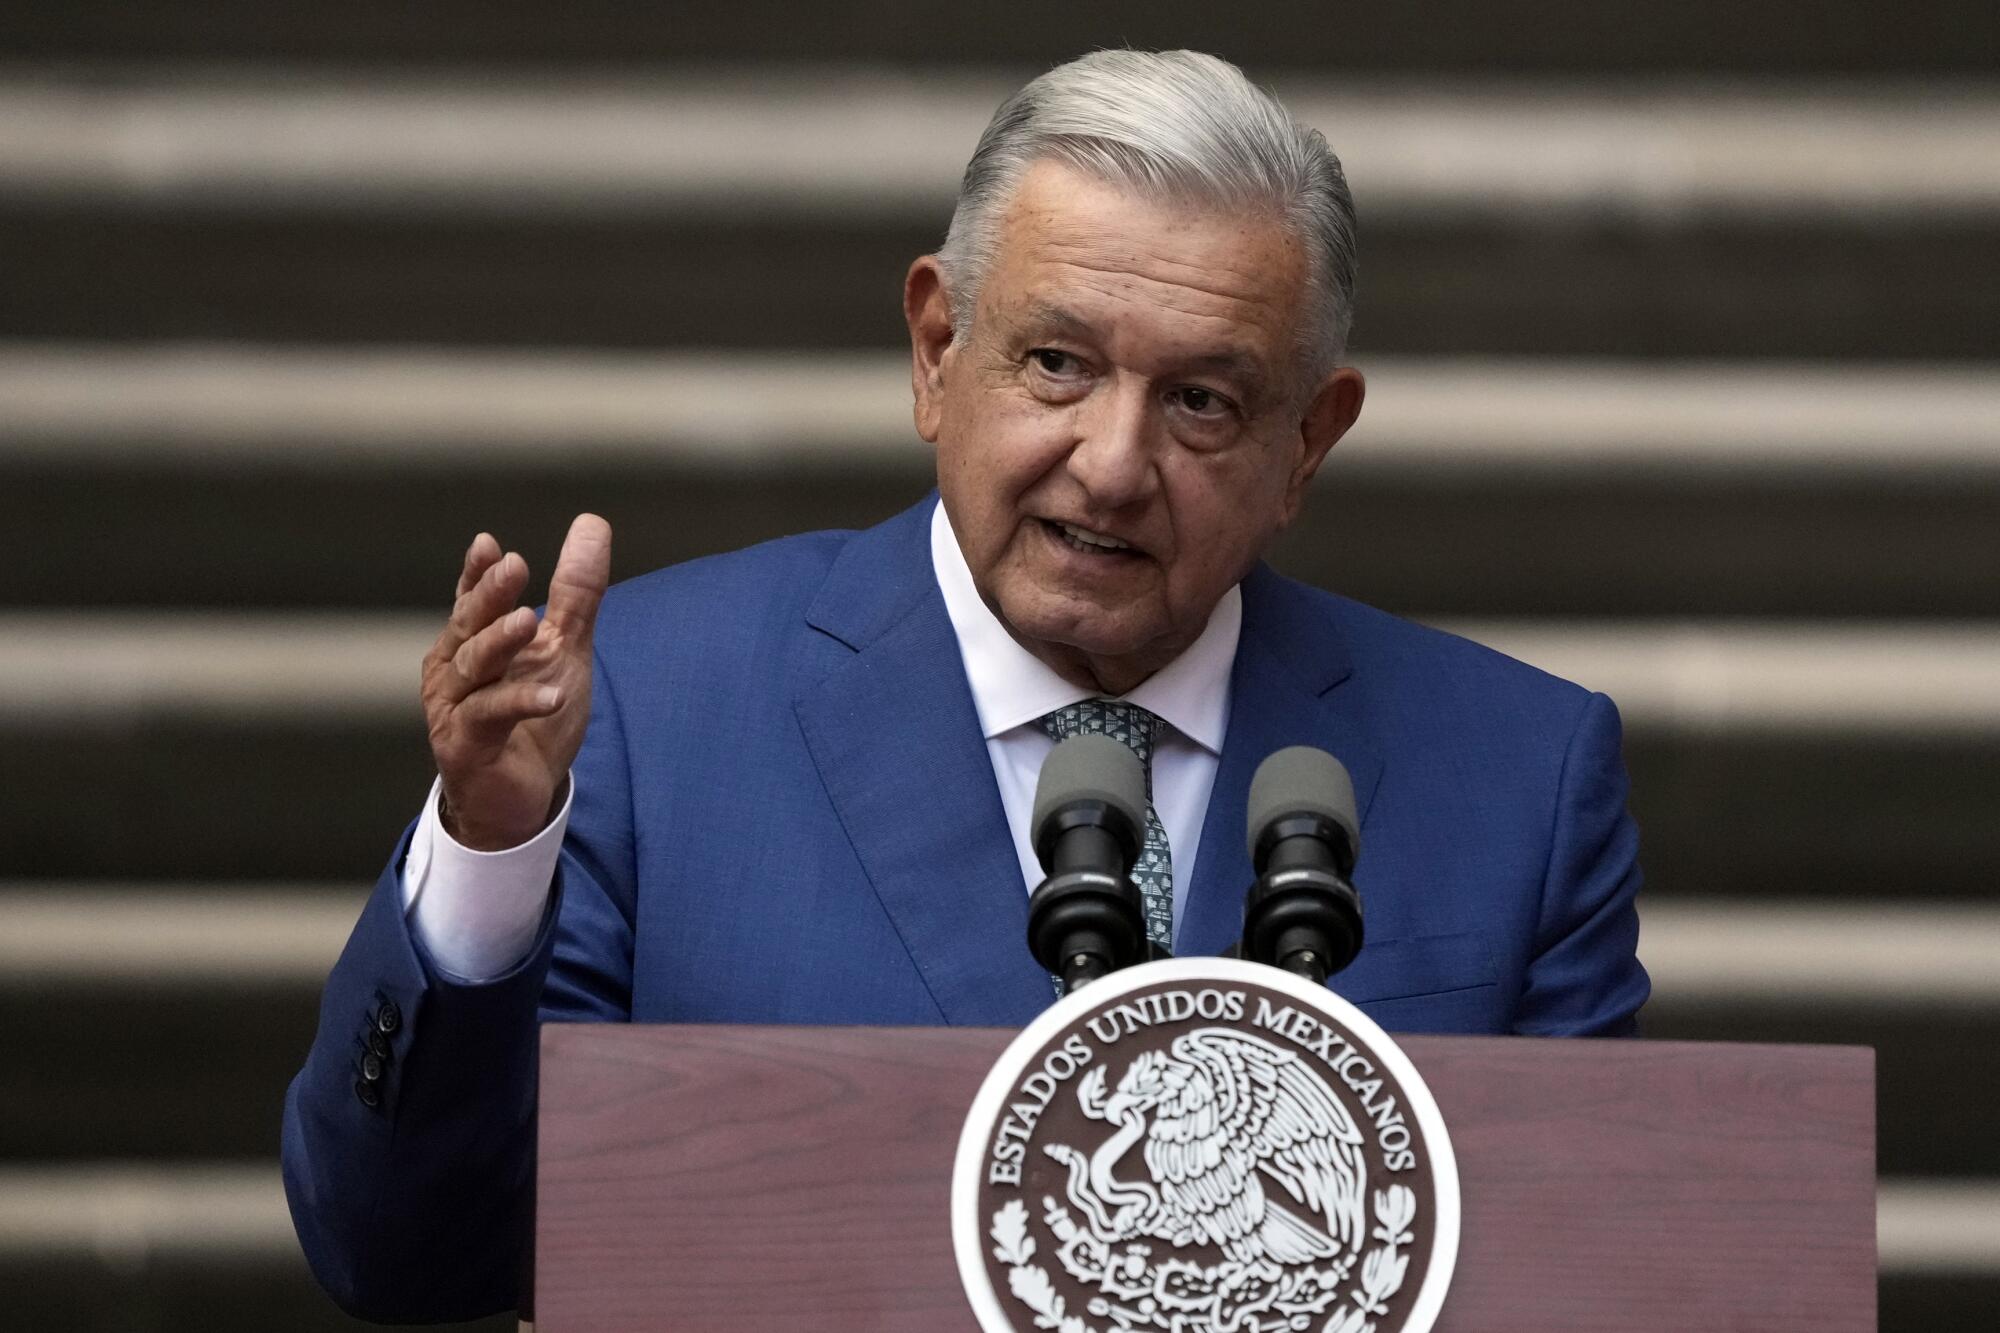 A man with gray hair, in a blue suit, gestures with one hand while speaking at a lectern with a government seal 